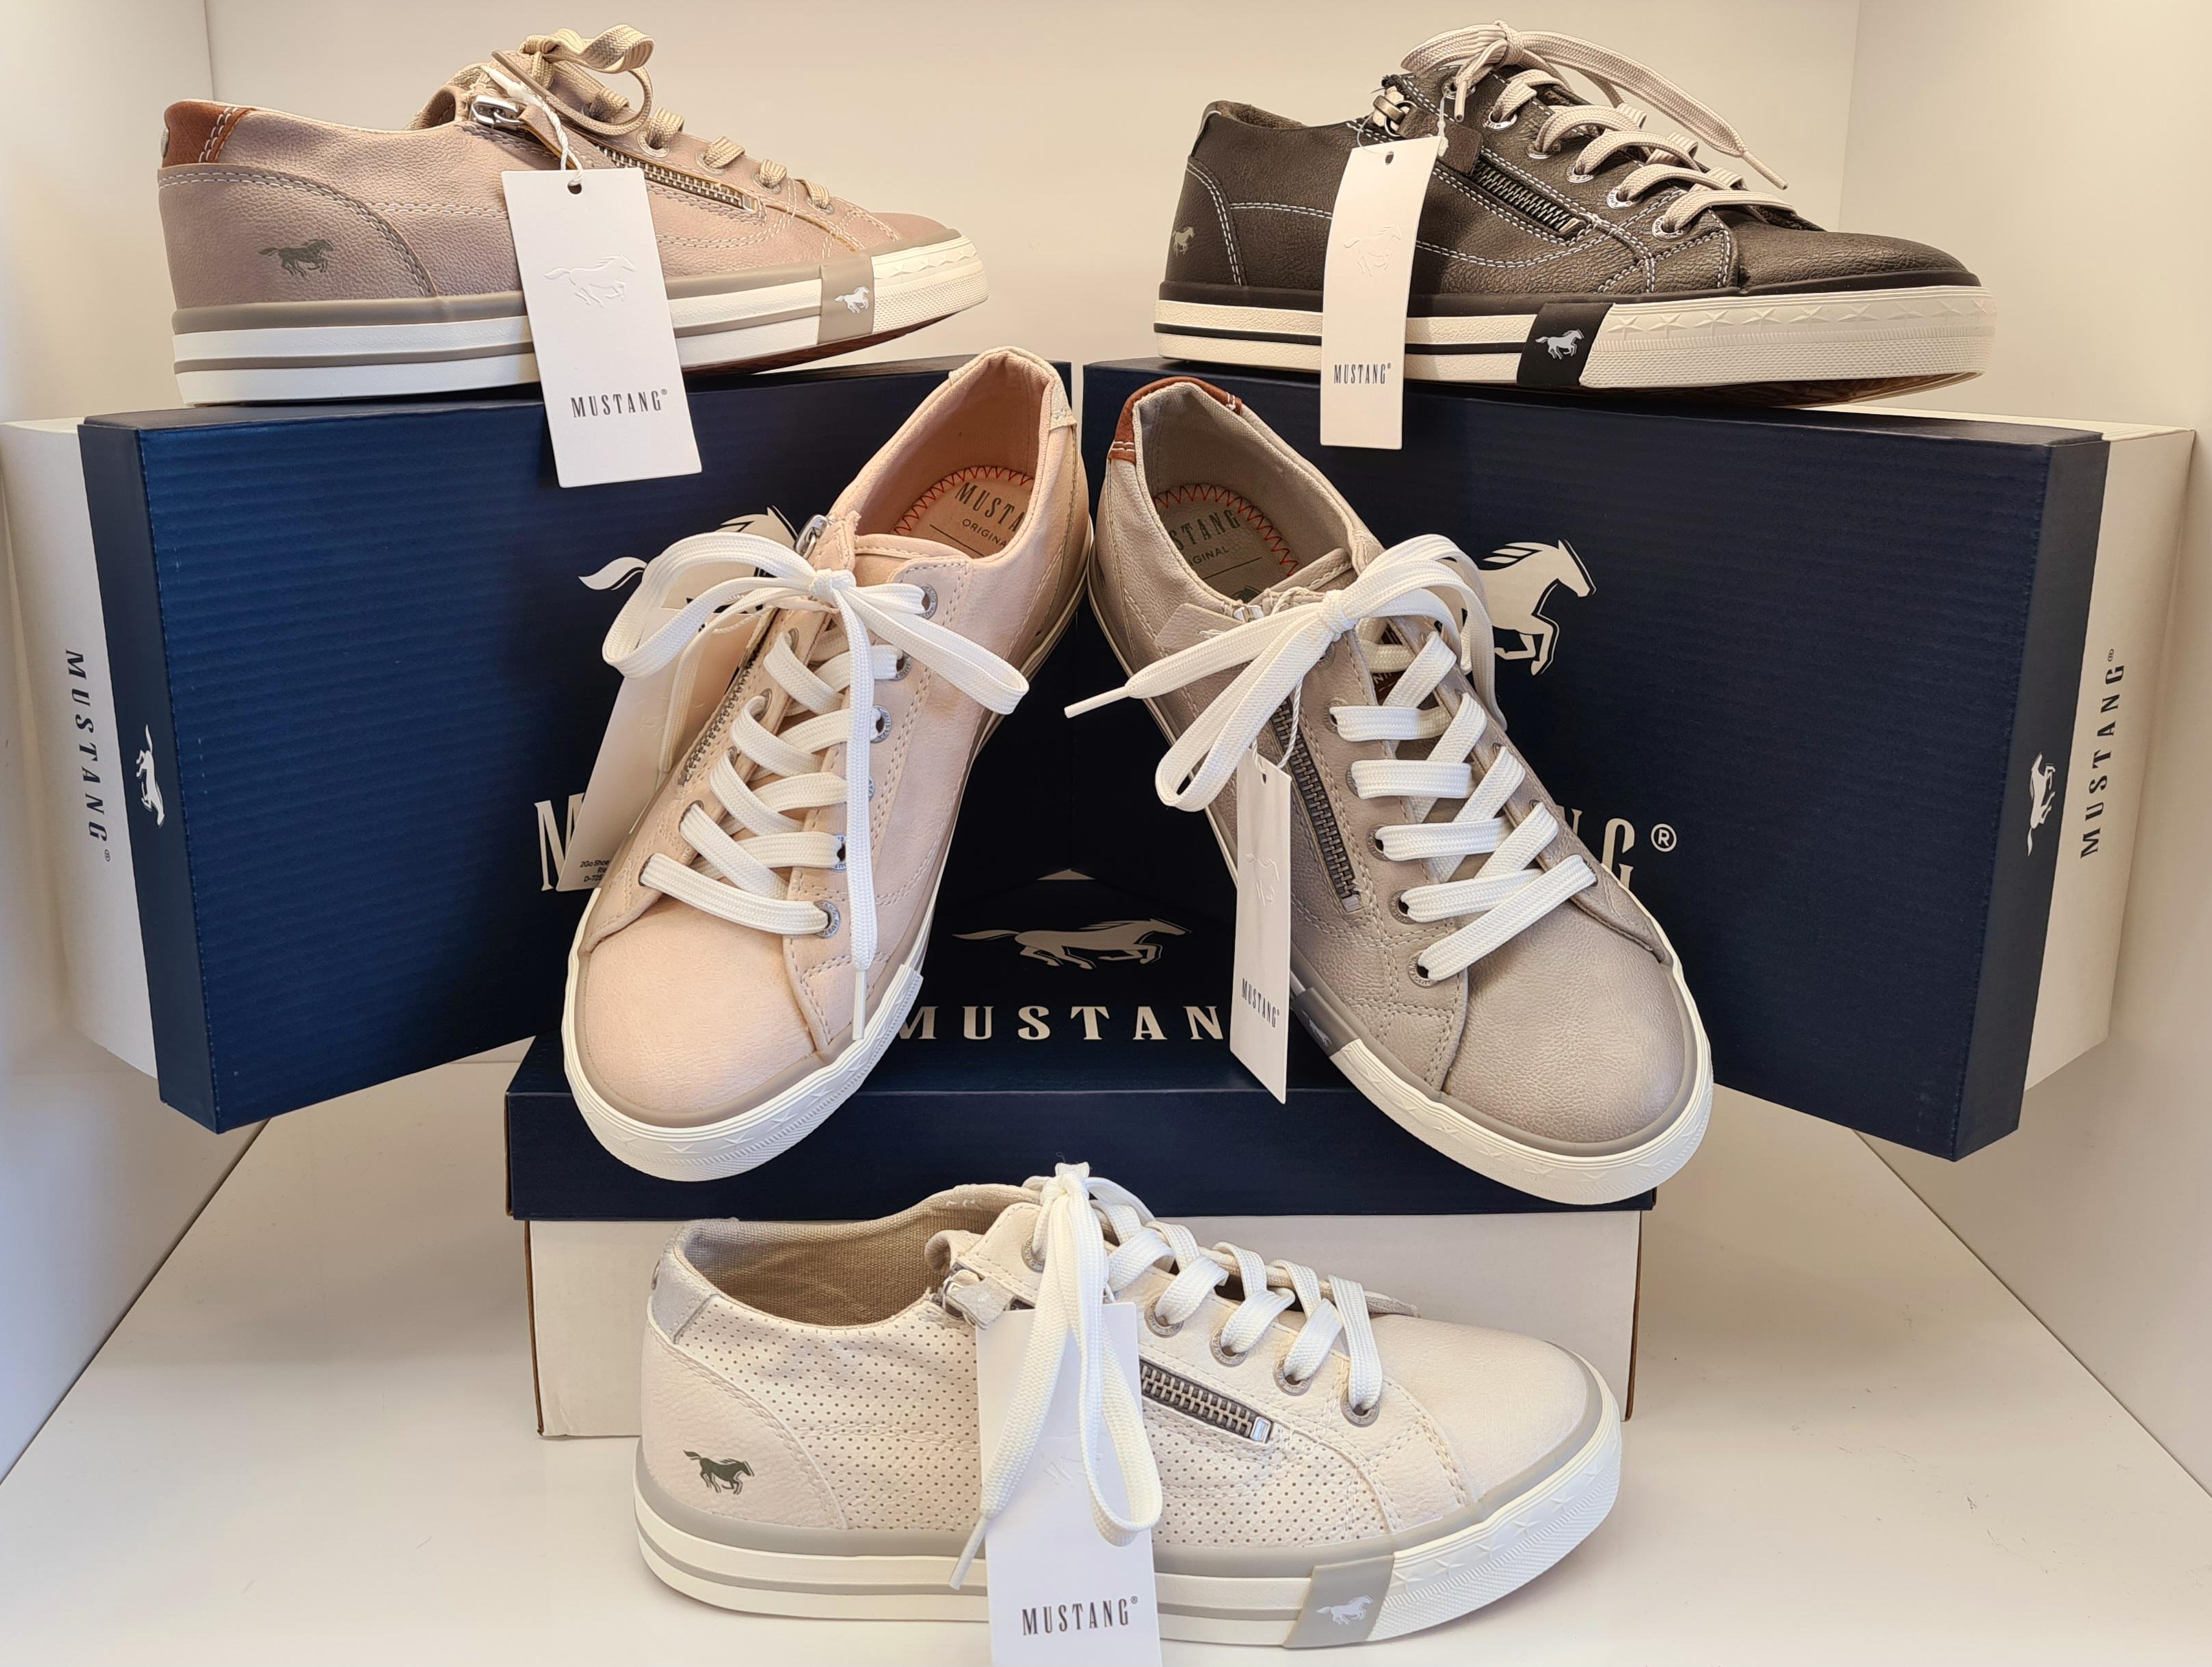 Besson Chaussures Moulins Avermes